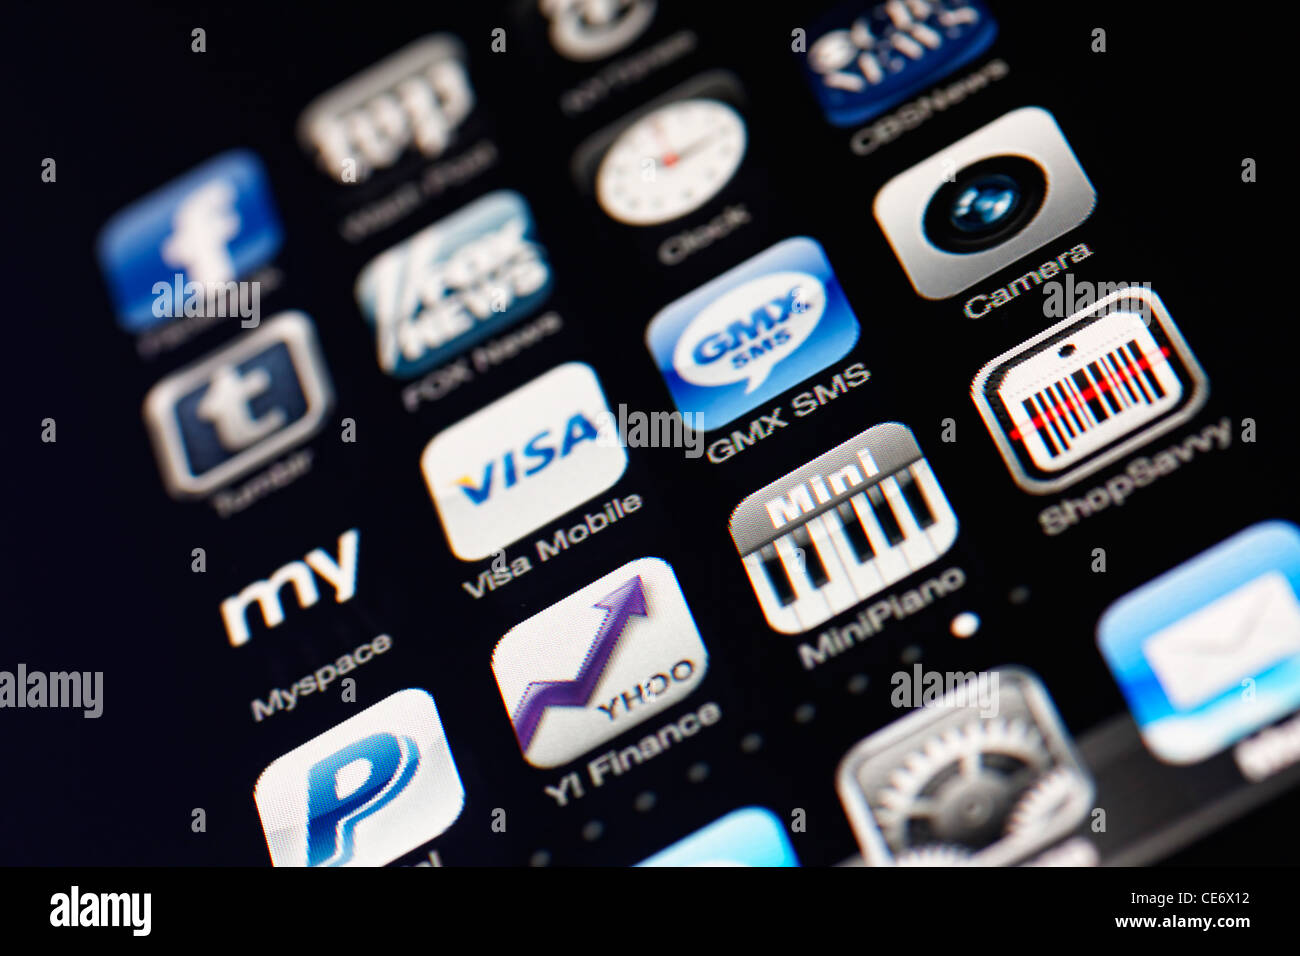 Muenster, Germany, January 26, 2012: Image of the iphone touch screen. Display shows a collection of useful apps with blue and g Stock Photo